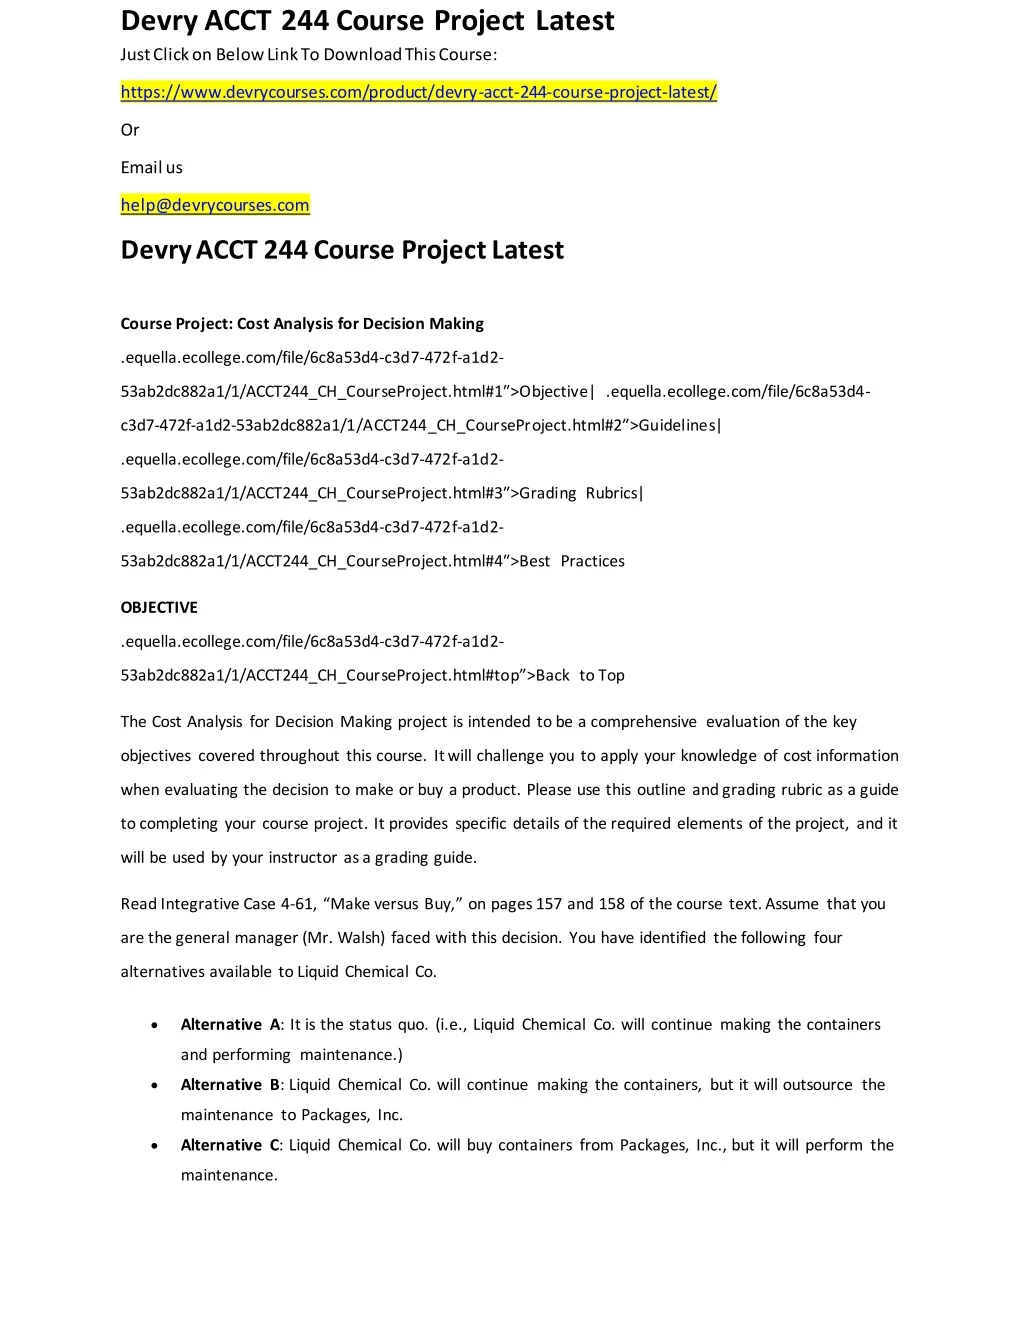 devry acct 244 course project latest just click